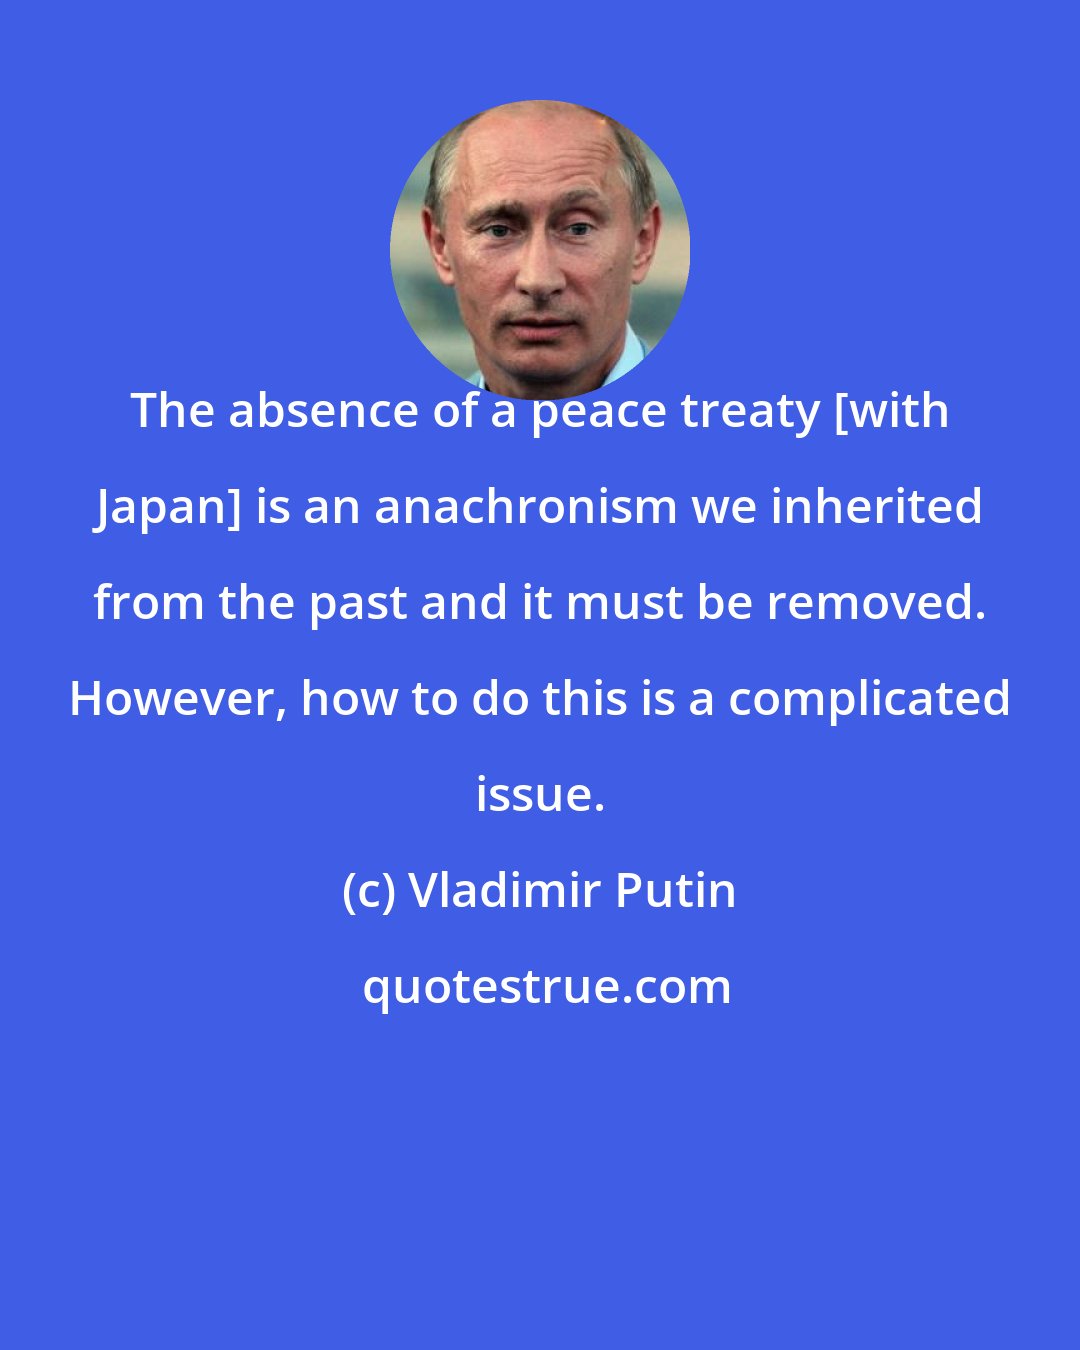 Vladimir Putin: The absence of a peace treaty [with Japan] is an anachronism we inherited from the past and it must be removed. However, how to do this is a complicated issue.